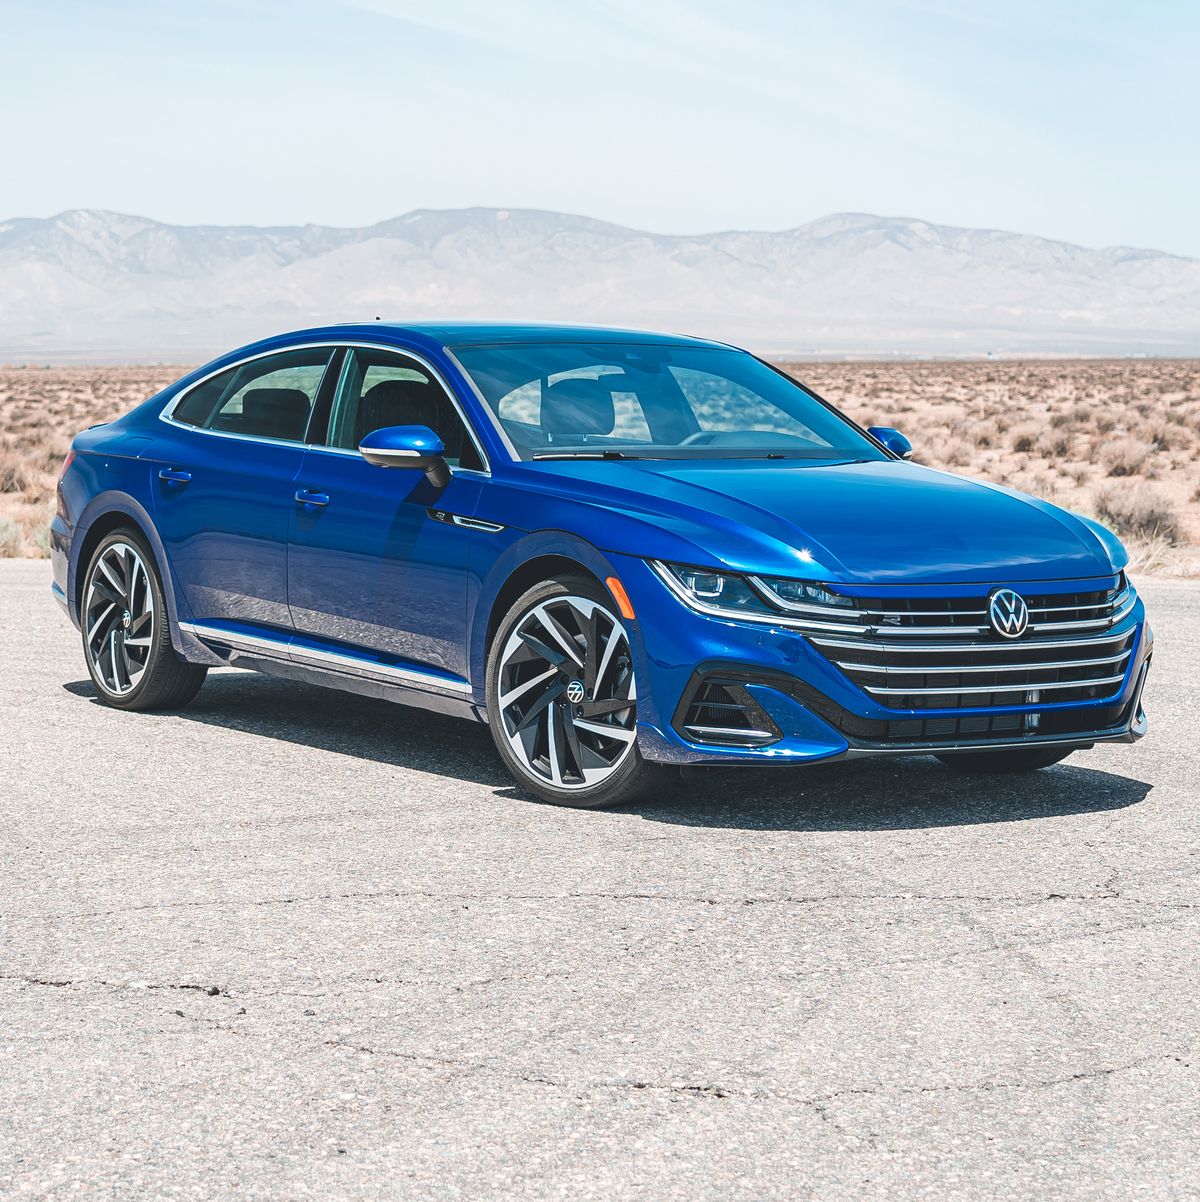 Volkswagen Arteon Is Heading for the Chopping Block